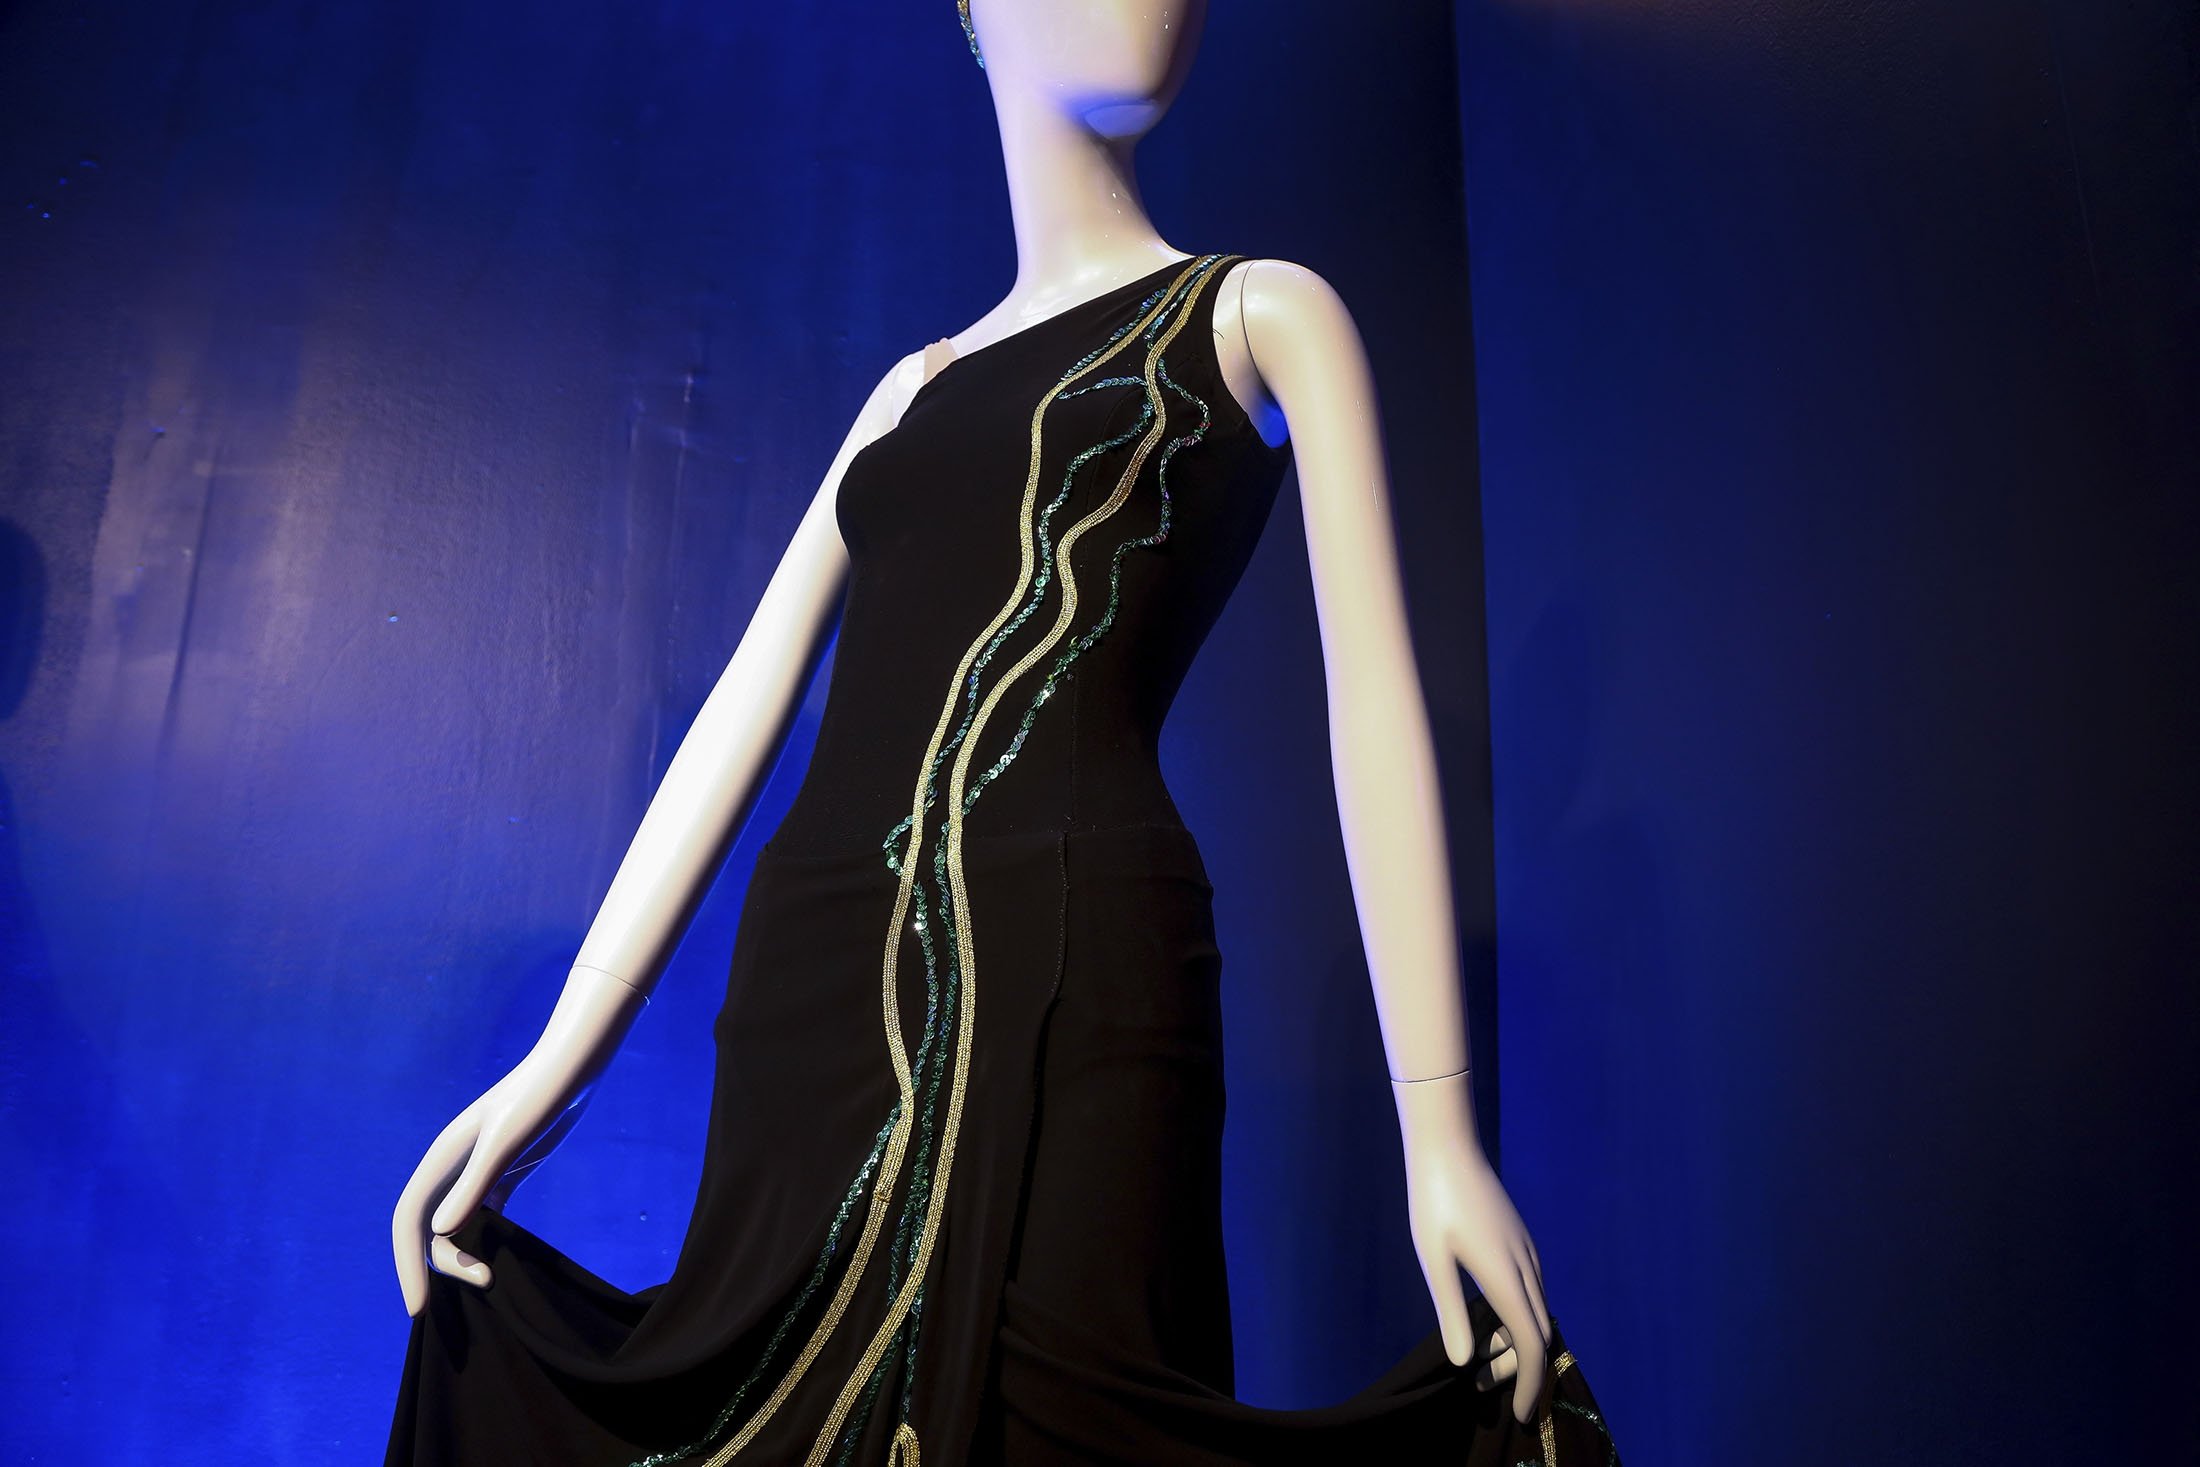 A costume from the Martha Graham Dance Company is displayed at the "Showstoppers! Spectacular Costumes from Stage & Screen" exhibit in Times Square, New York, U.S., Aug. 2, 2021. (AP Photo)